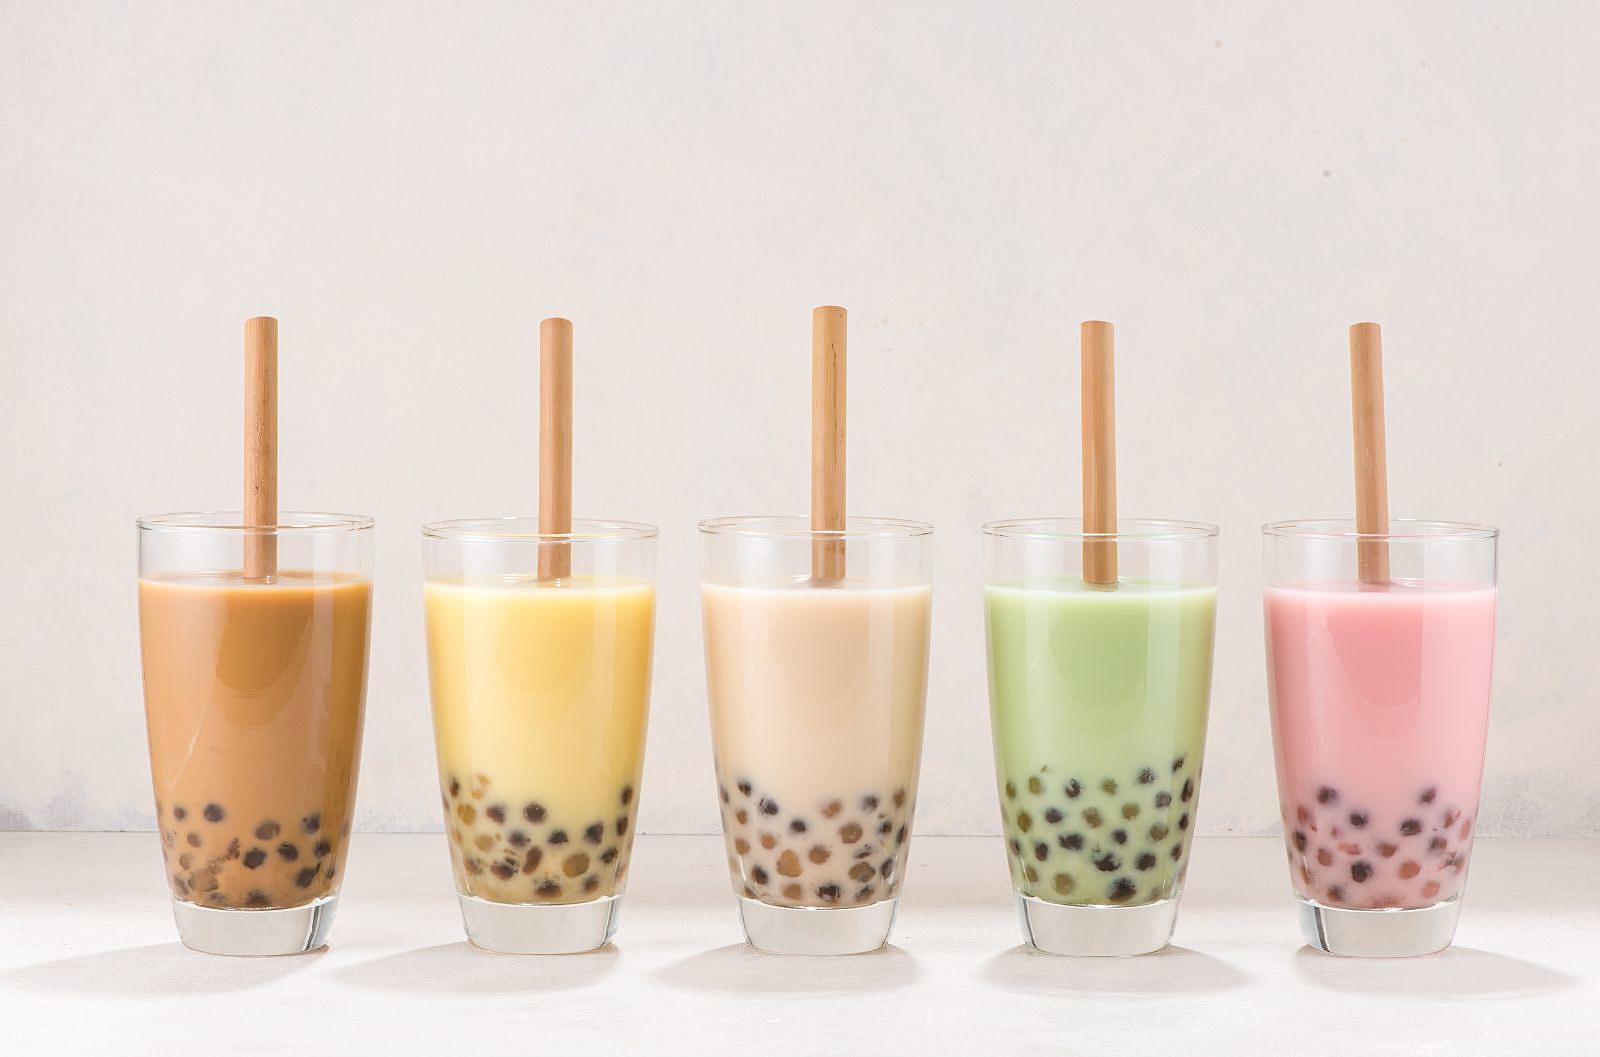 Theon Boba Tea and Cafe Momo House Opens in Grand Rapids